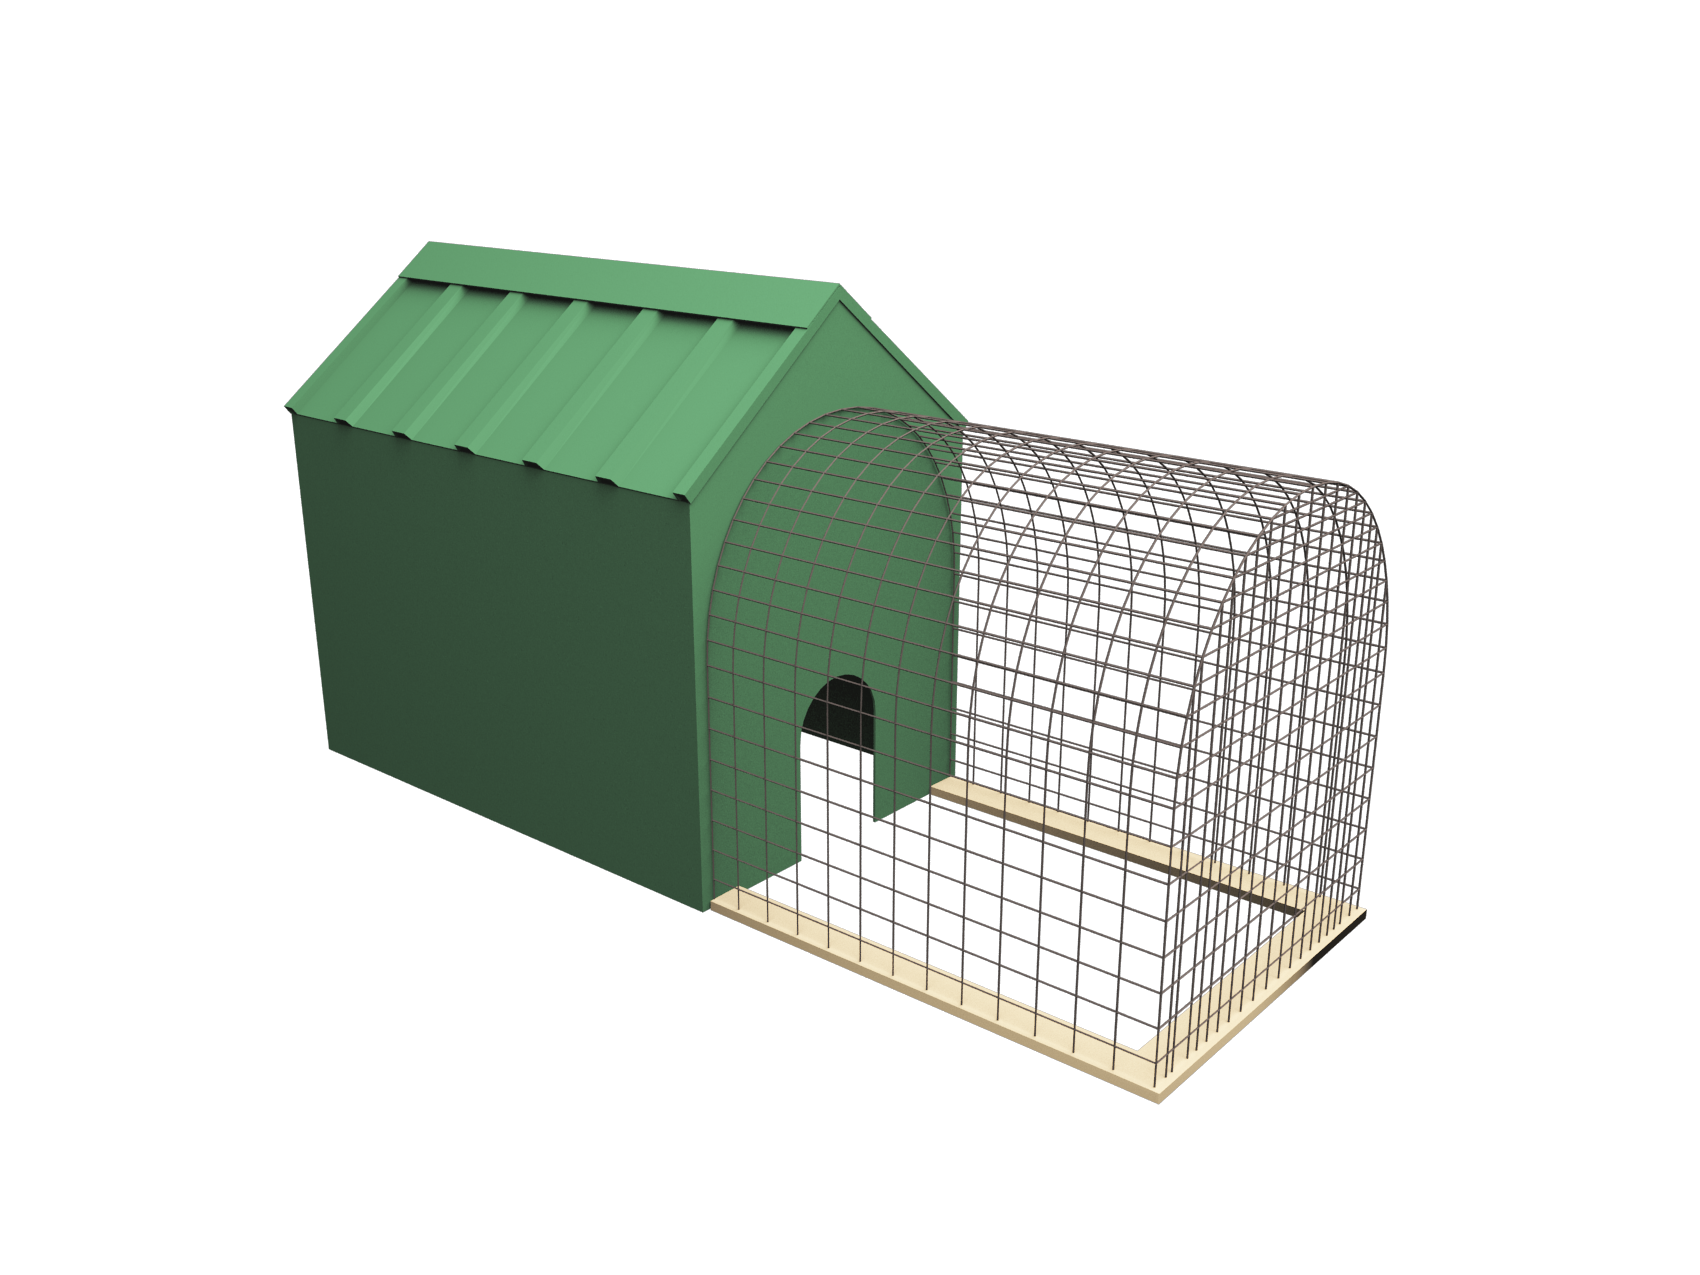 The Hen Coop is a farm invention specially designed to provide predator-proof poultry coop for chickens.